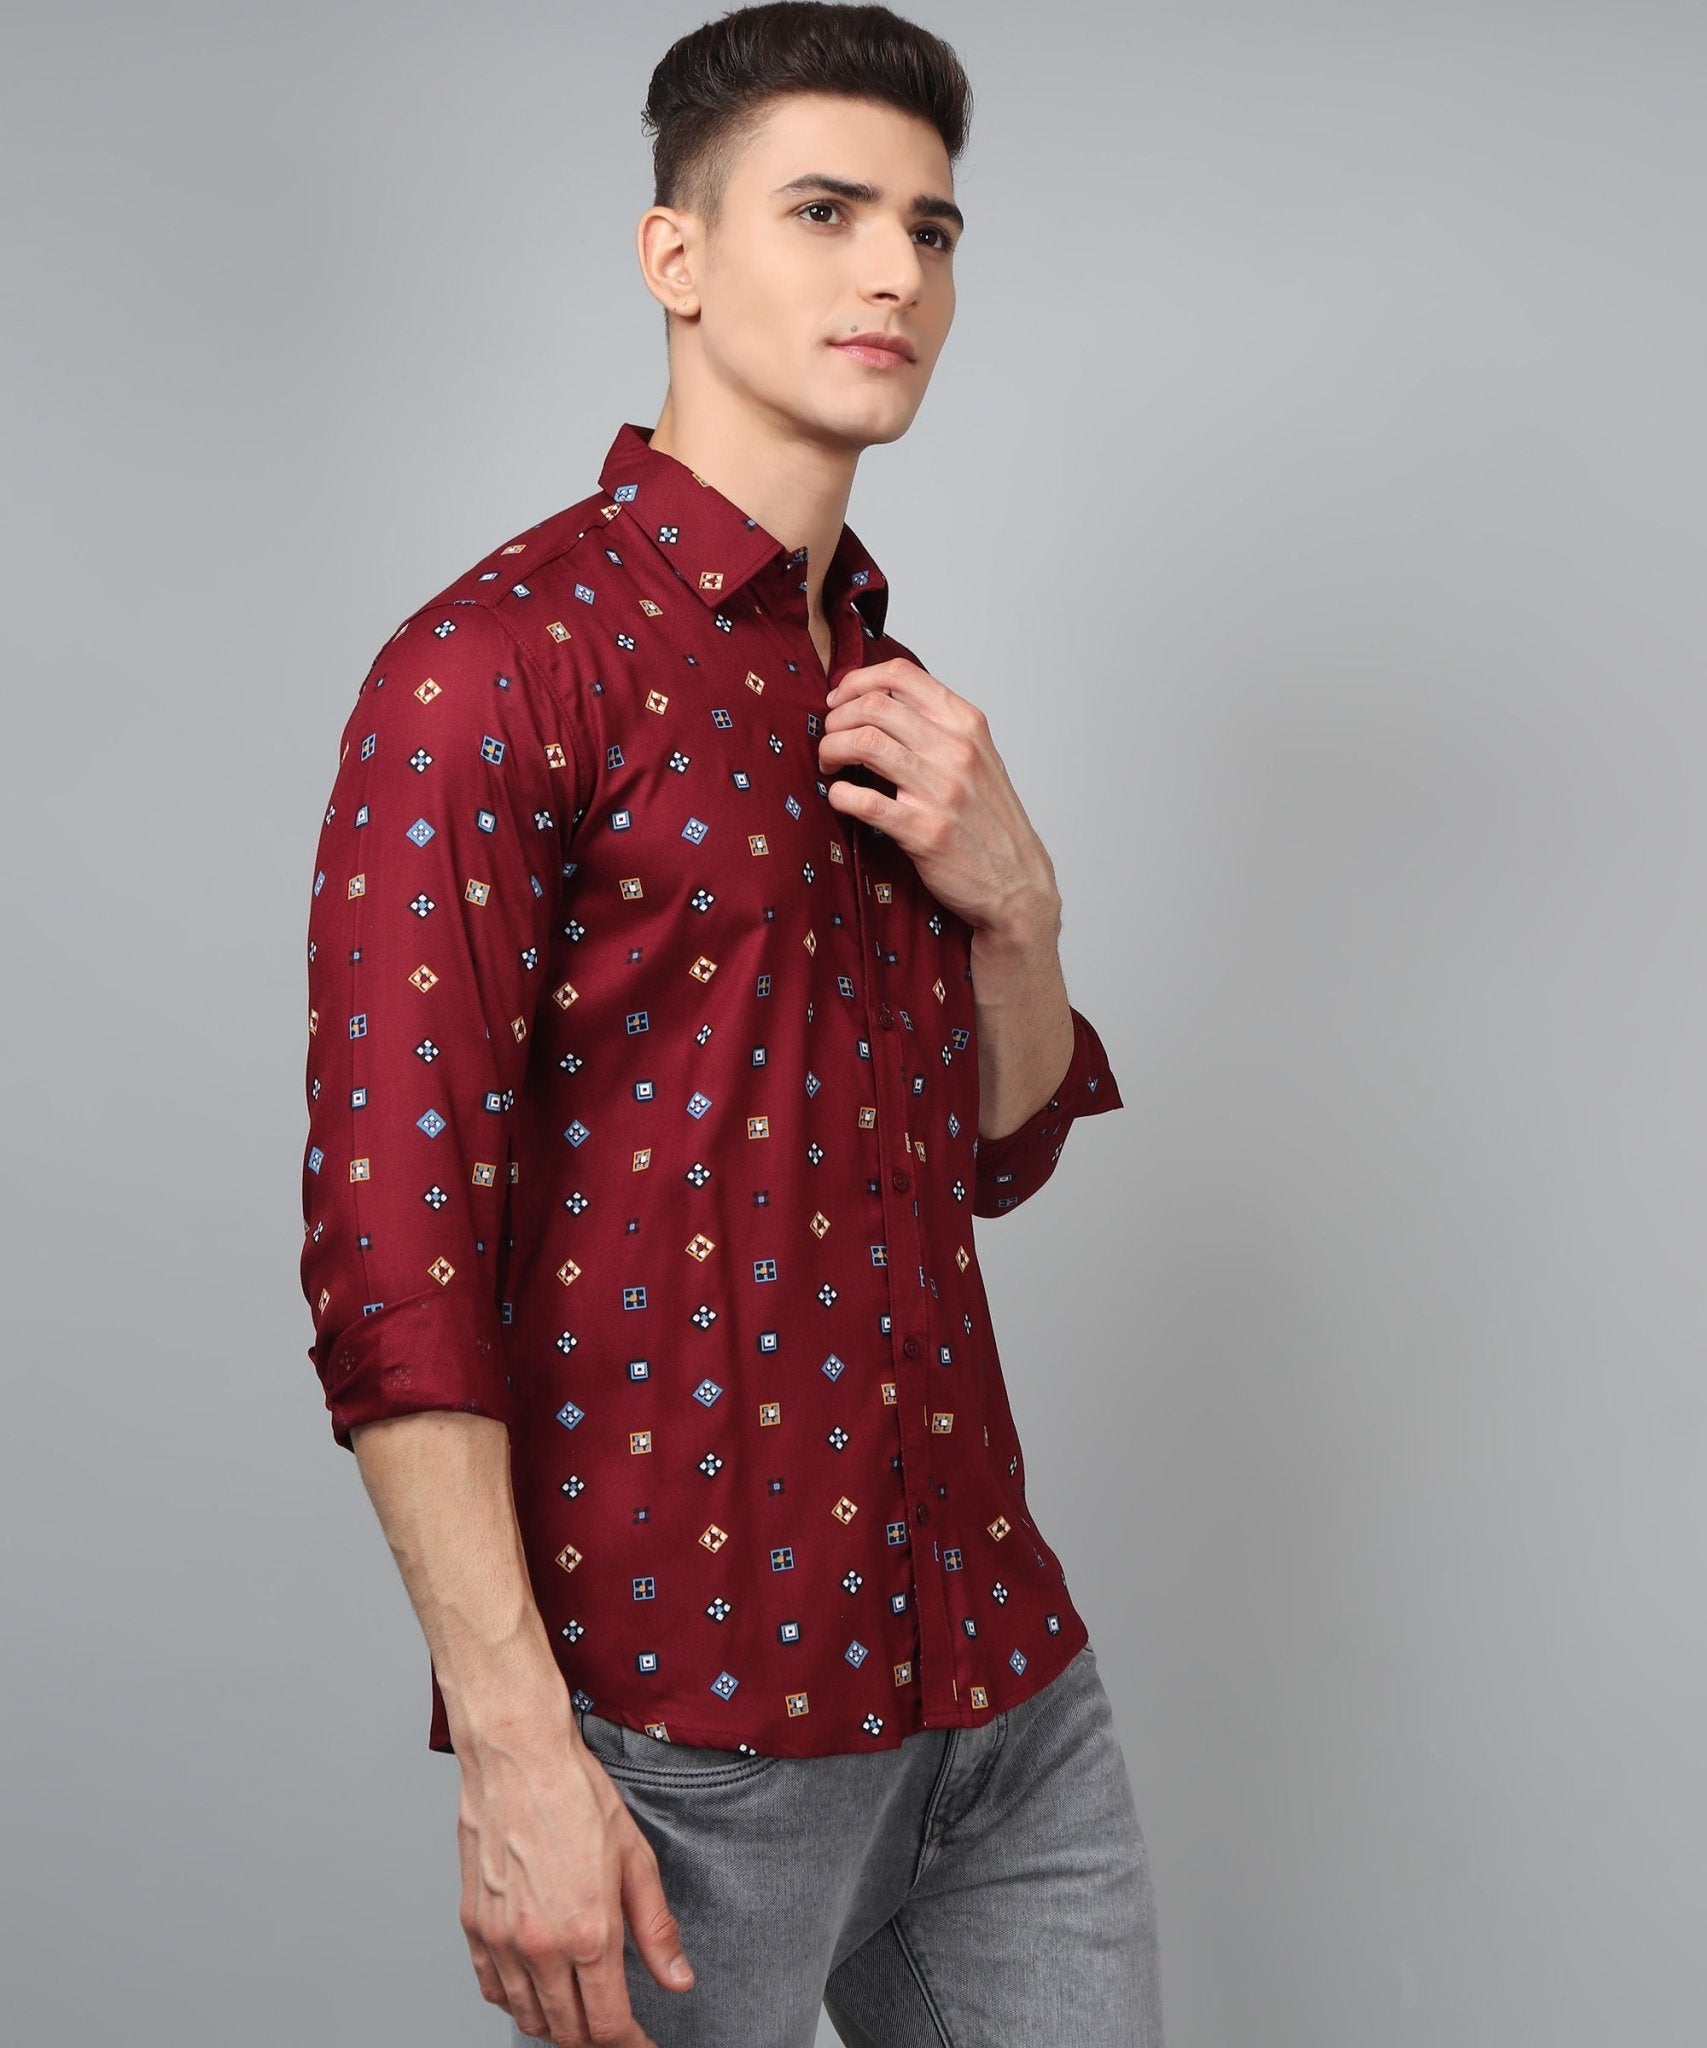 Fancy Trybuy Premium Printed Cotton Casual Shirt for Men - TryBuy® USA🇺🇸